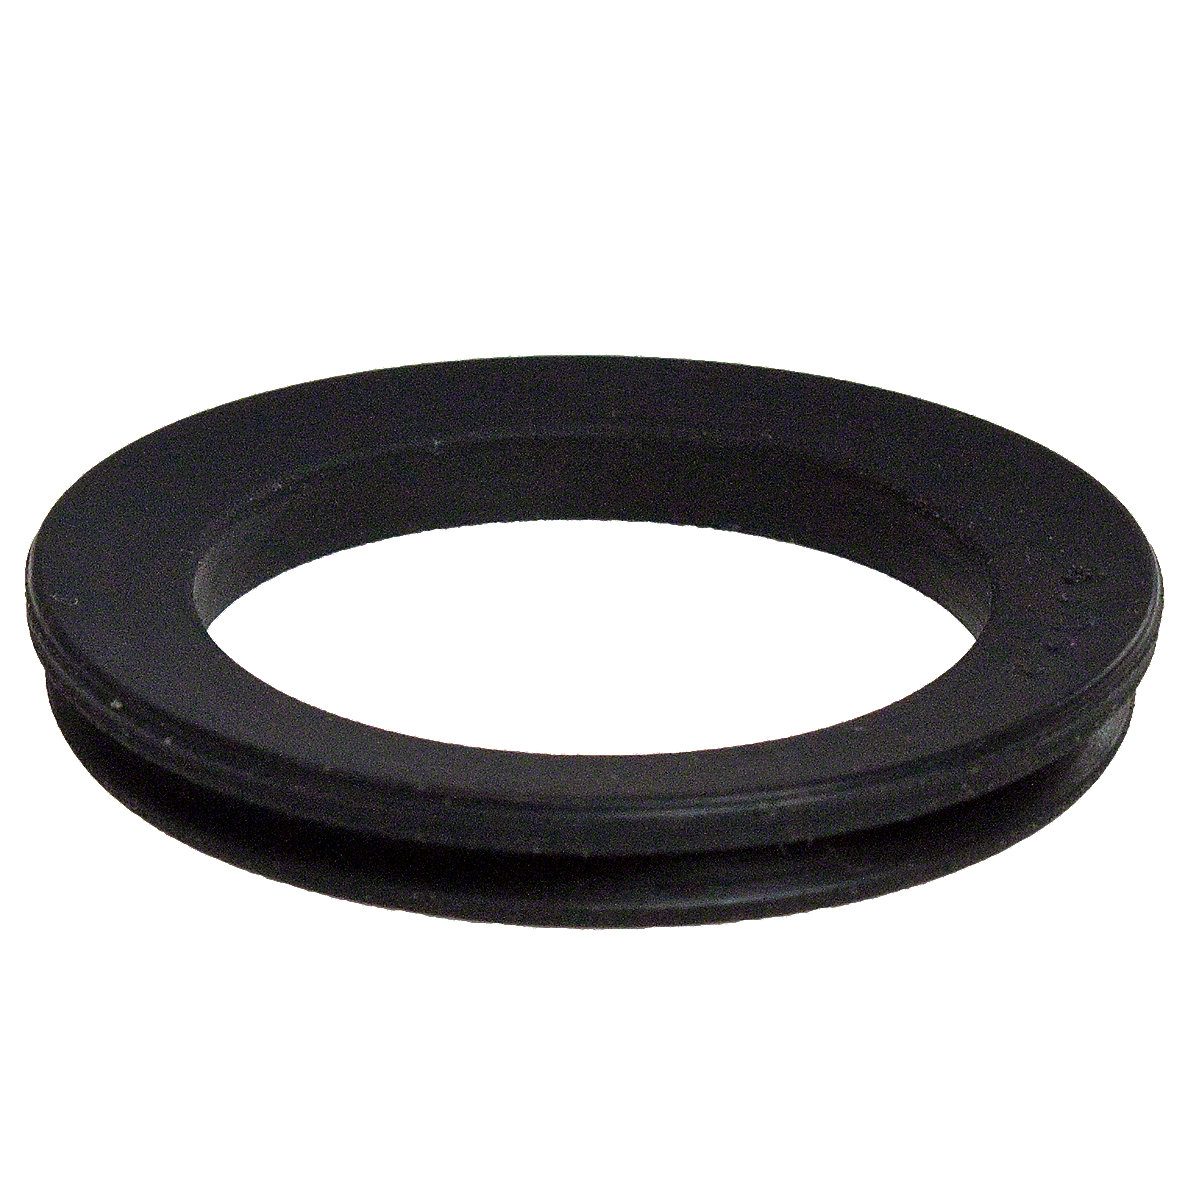 Spindle Dust Seal For Massey Ferguson: TE20, TEA20, TO20, TO30, TO35, 130, 135, 2135, 230, 35, 40, 50, 150, 165, Massey Harris: 50.